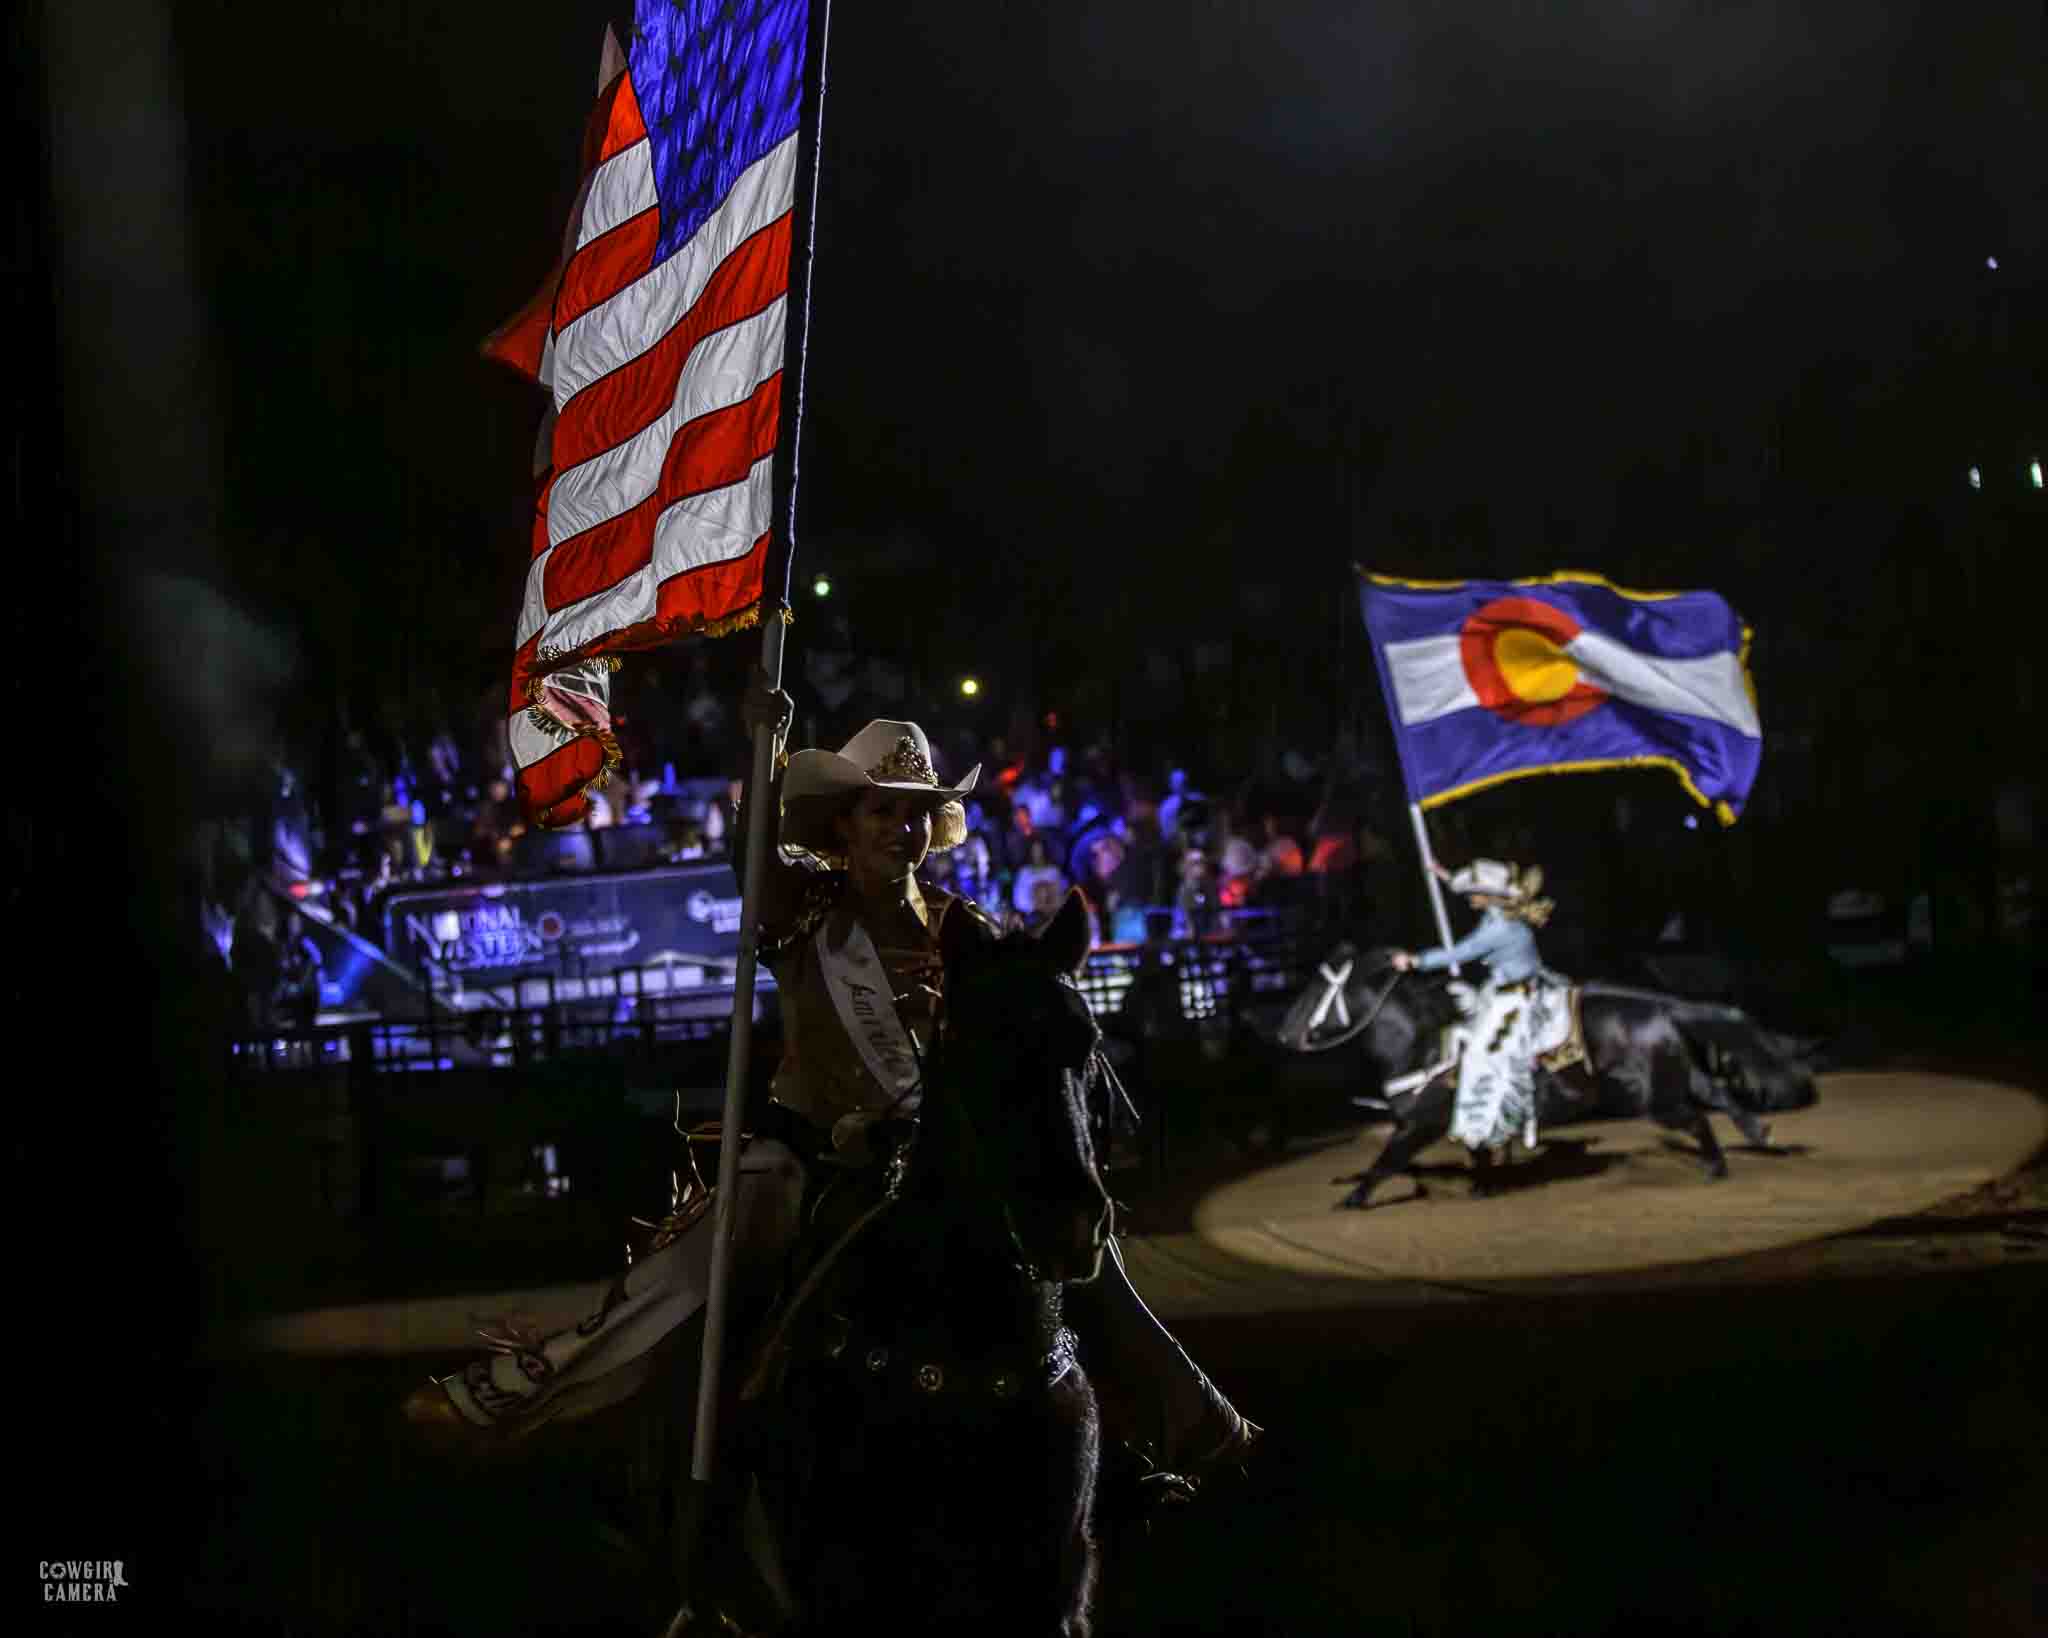 Dark arena with spotlights on the riders with the american flag and the Colorado flag